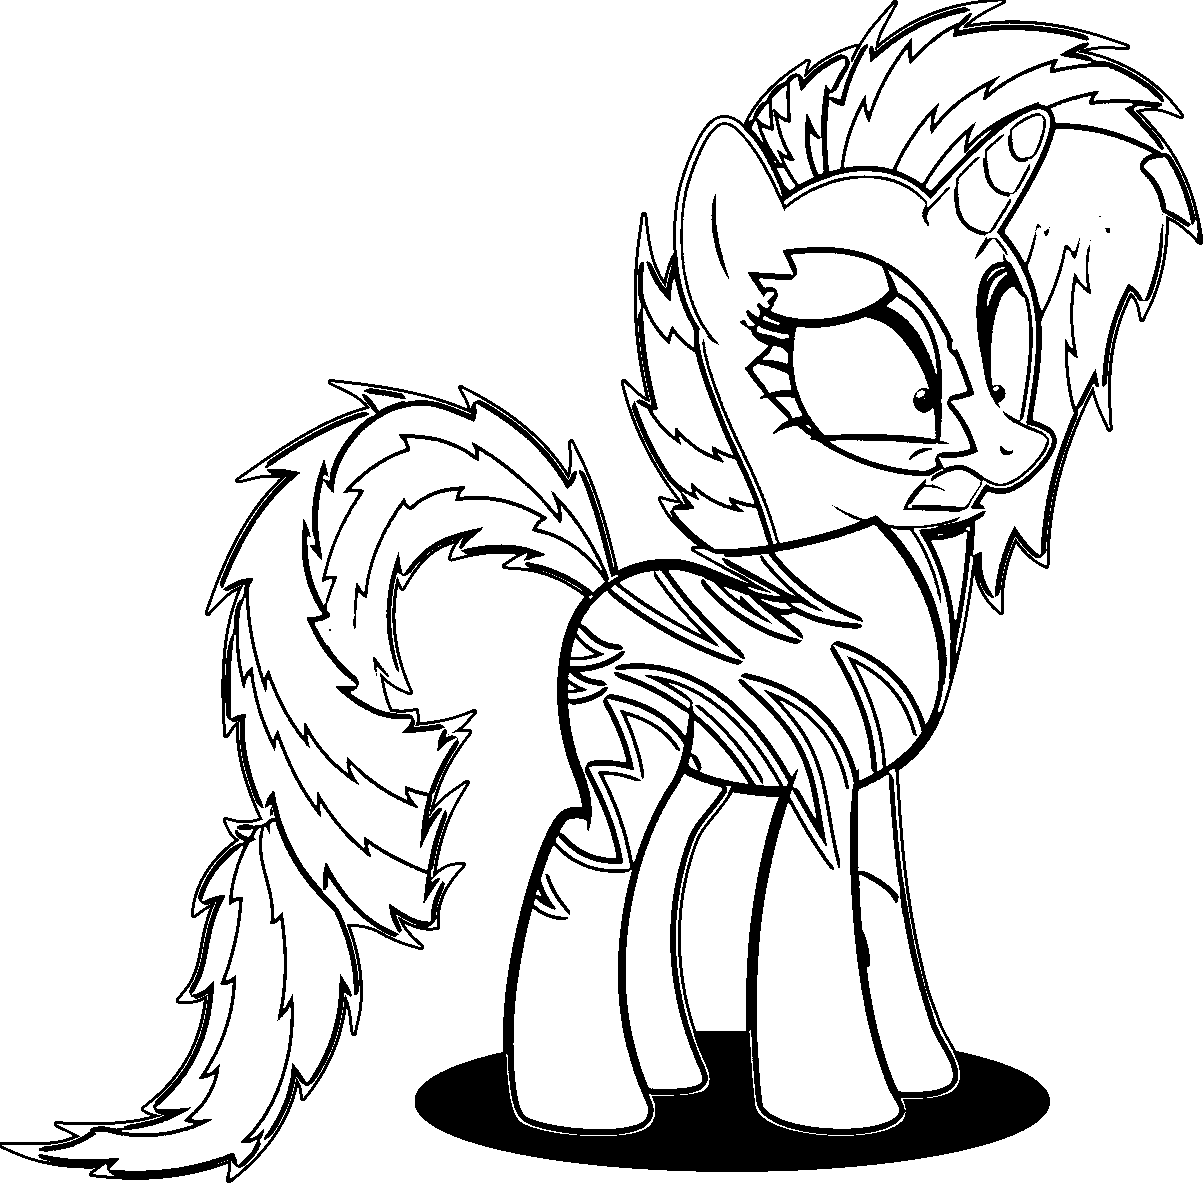 Pony Cartoon My Little Pony Coloring Page 002 | Wecoloringpage